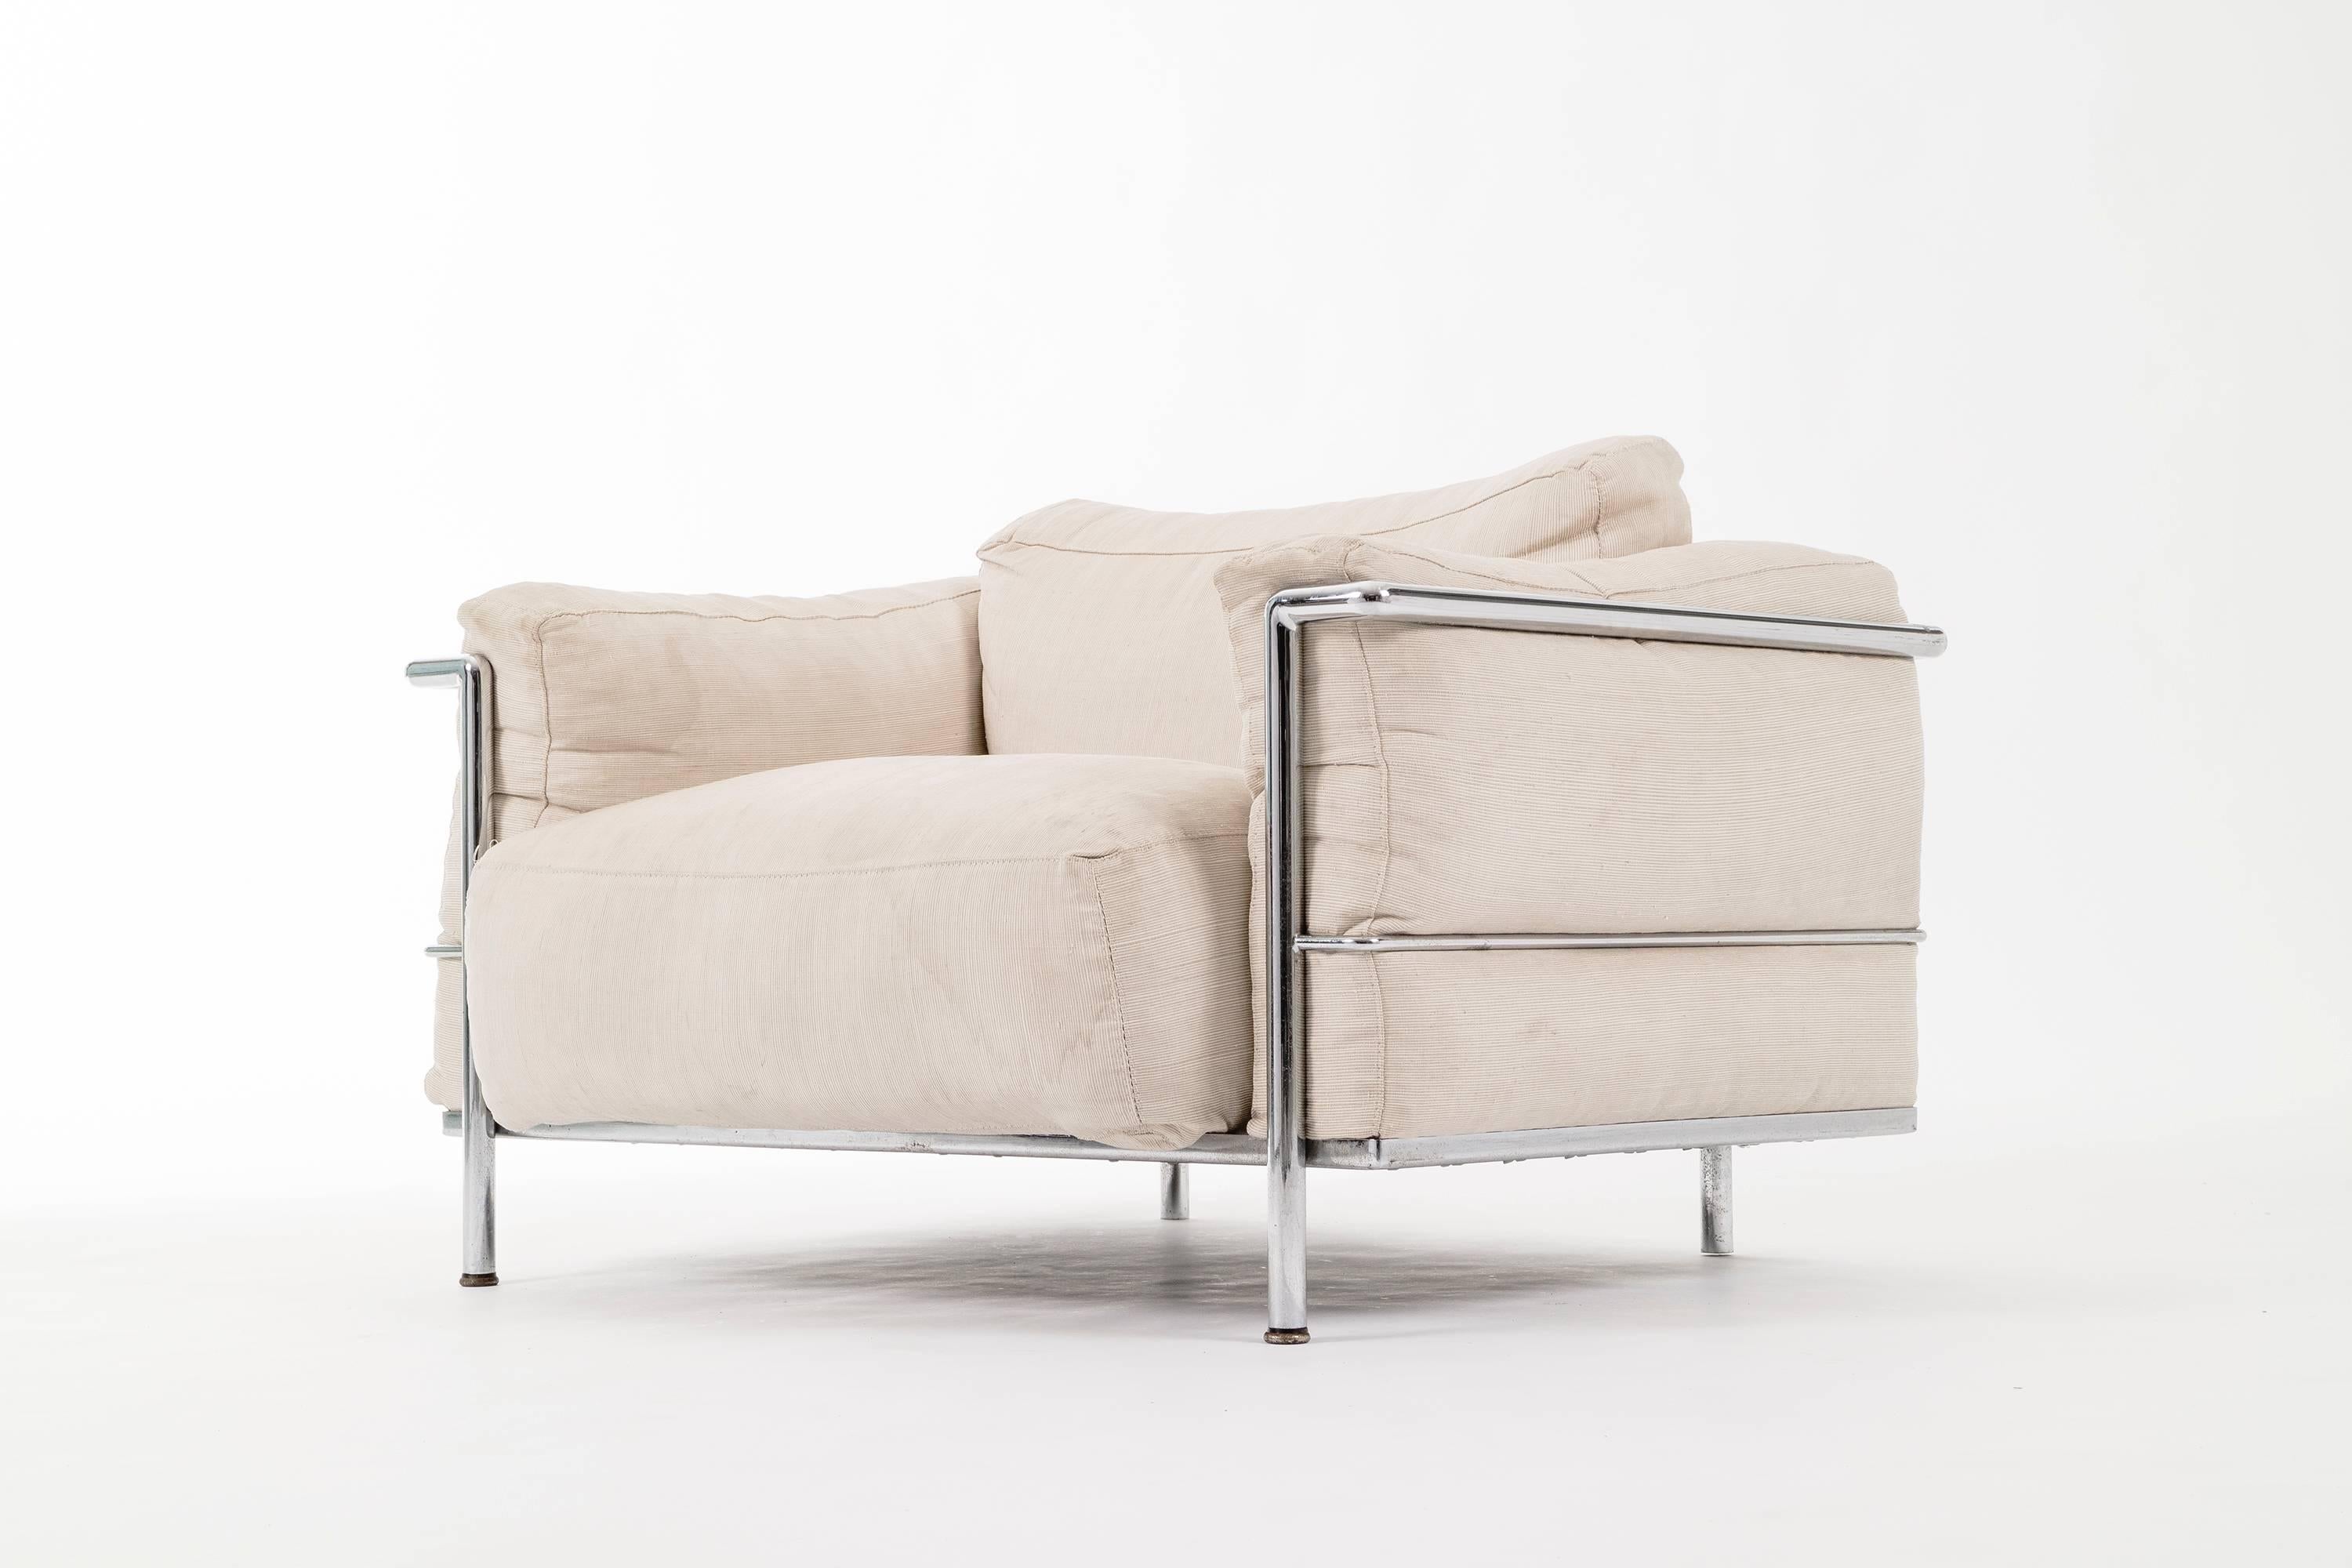 Le Corbusier, Pierre Jeanneret and Charlotte Perriand's LC3 Lounge designed in 1928 and produced in the mid-1960s by Cassina. This Iconic club chair has a chrome-plated steel tube cage like frame that supports four connection free cushions.